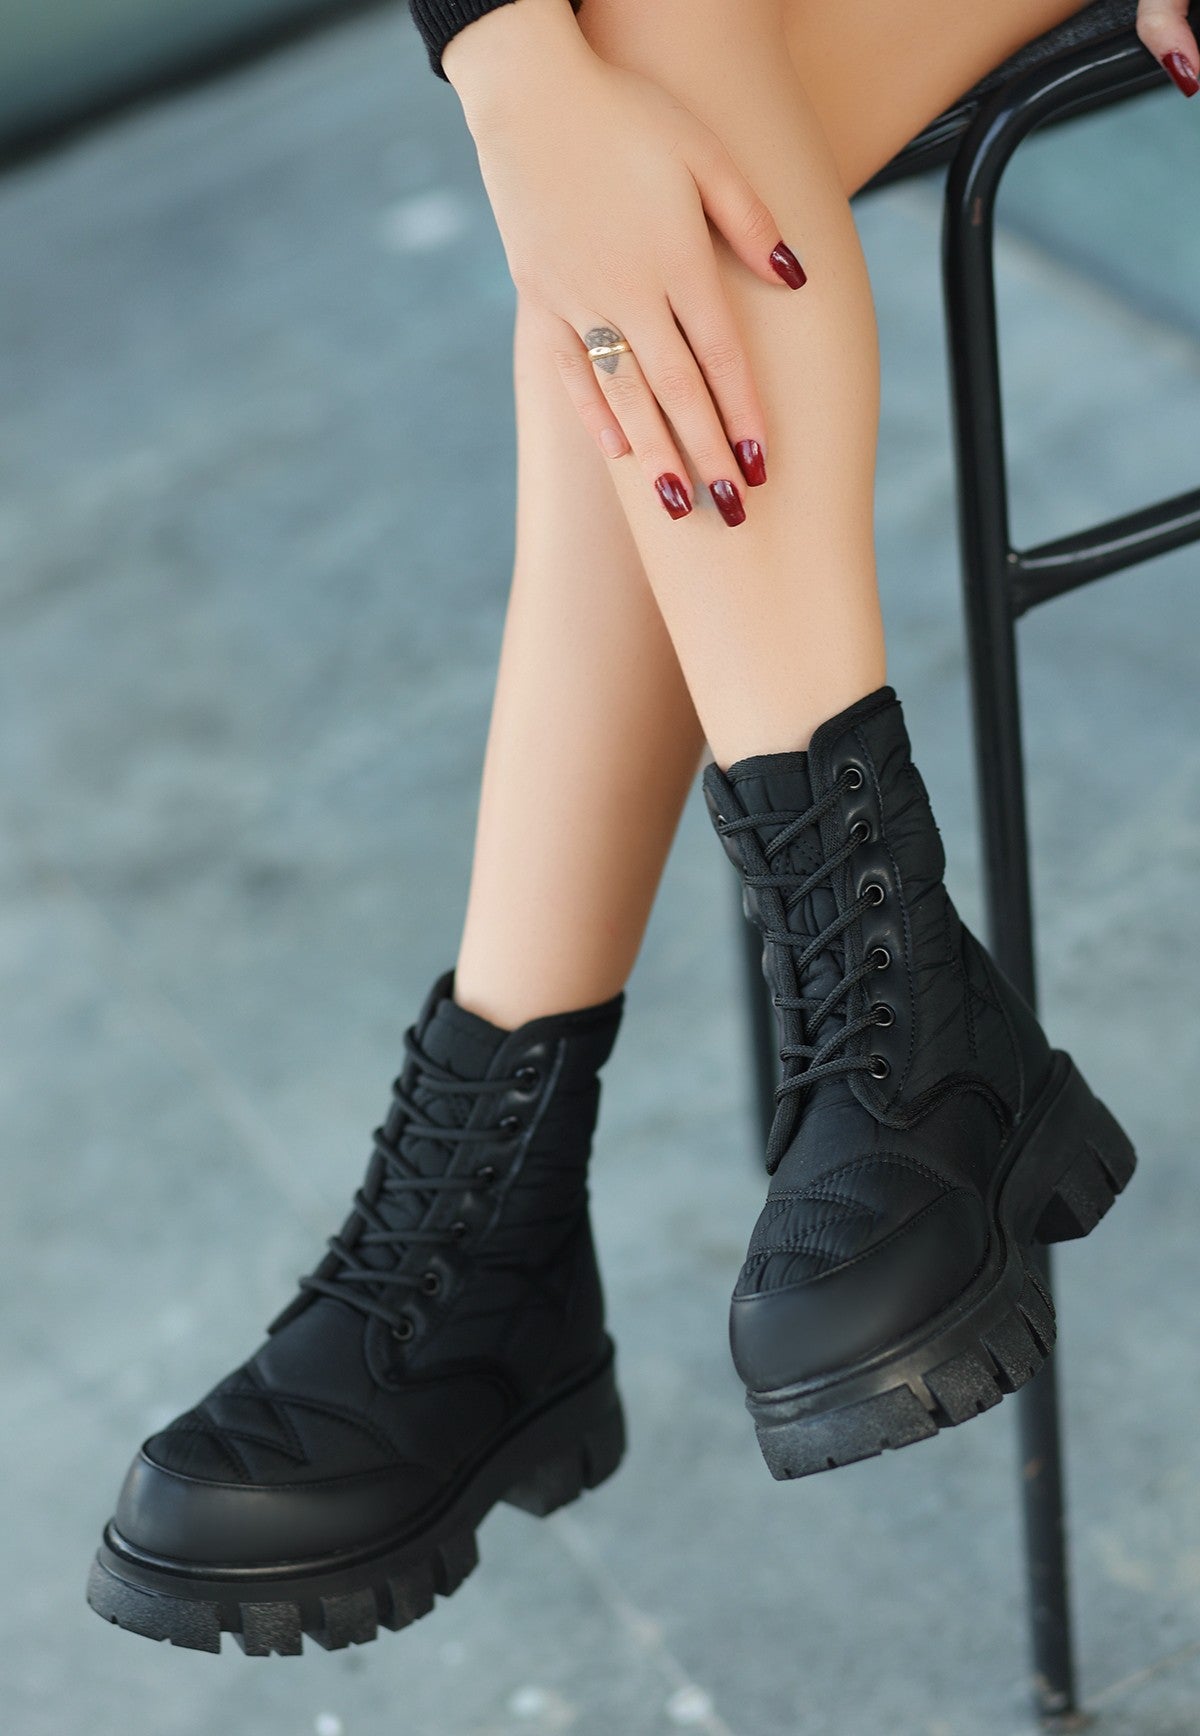 Women's Mabel Black Leather Laced Boots - STREETMODE ™